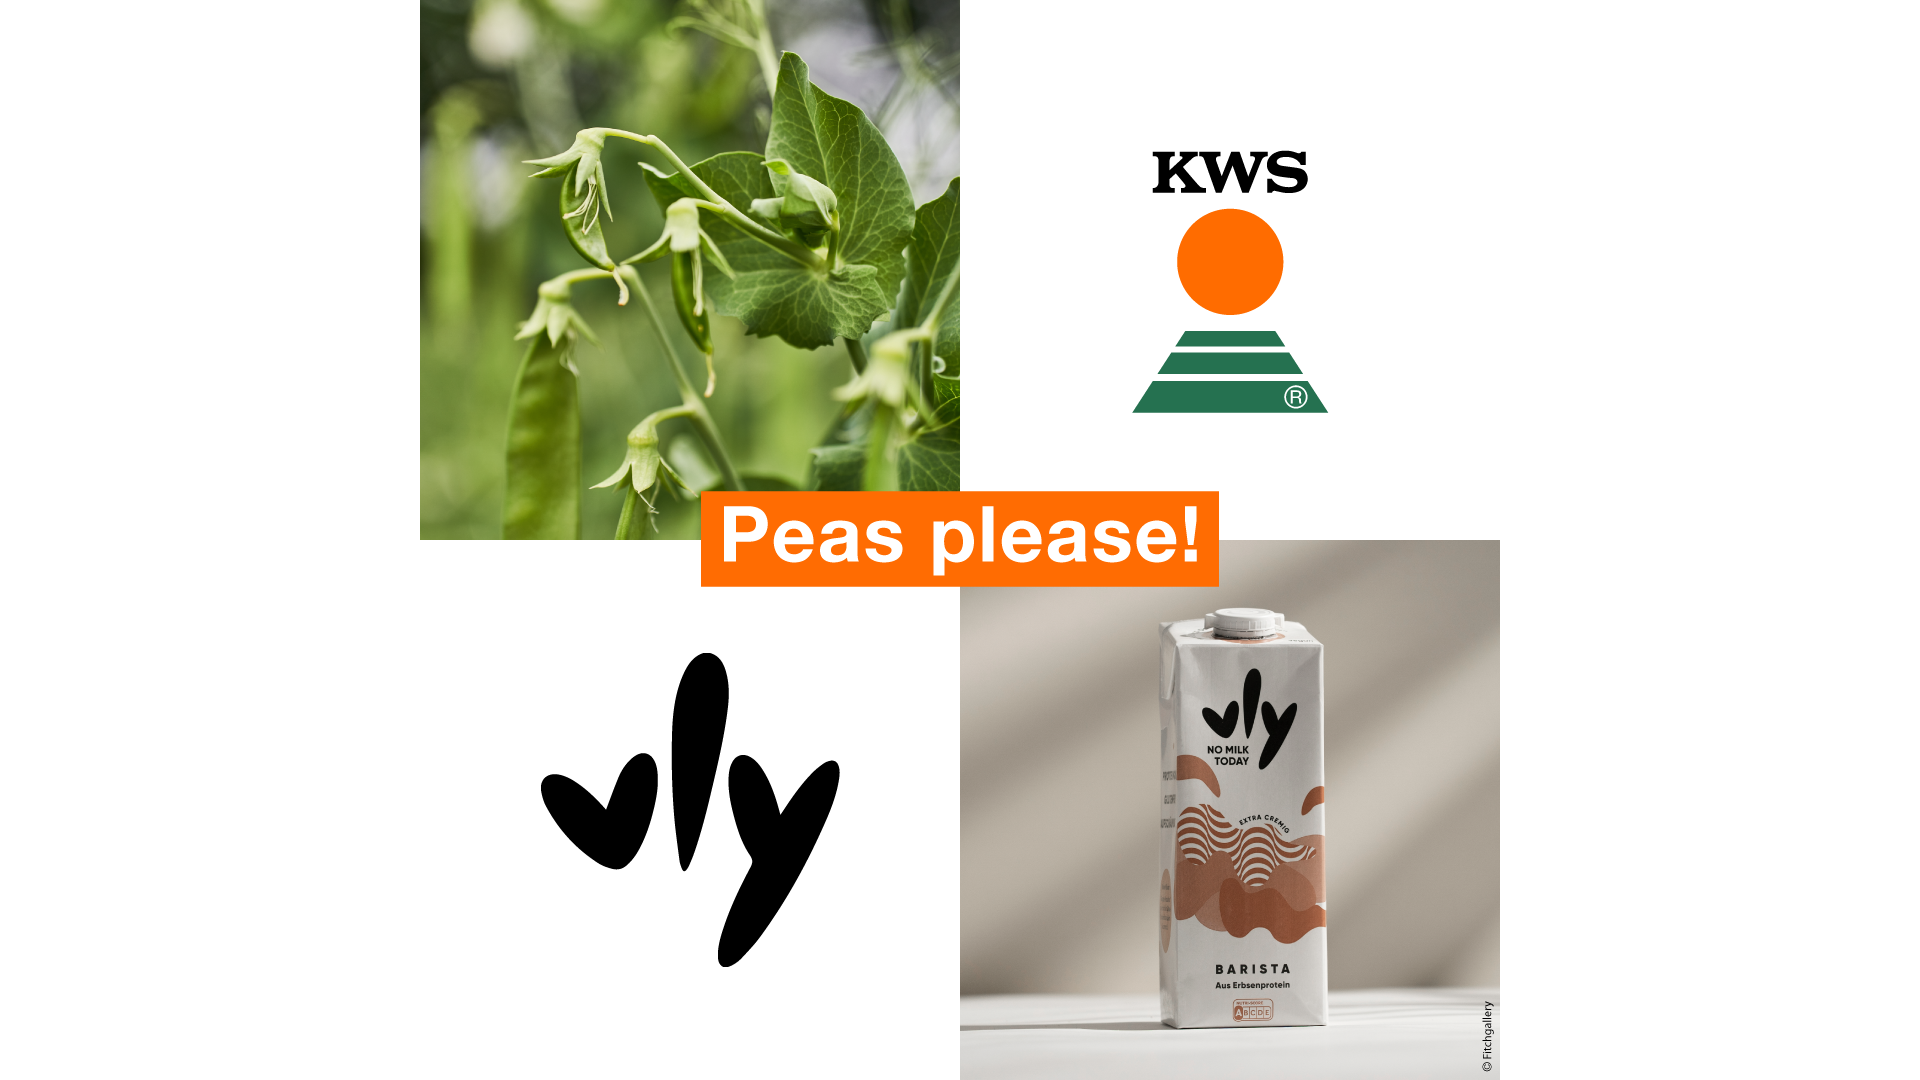 KWS partners with vly to further develop plant-based foods